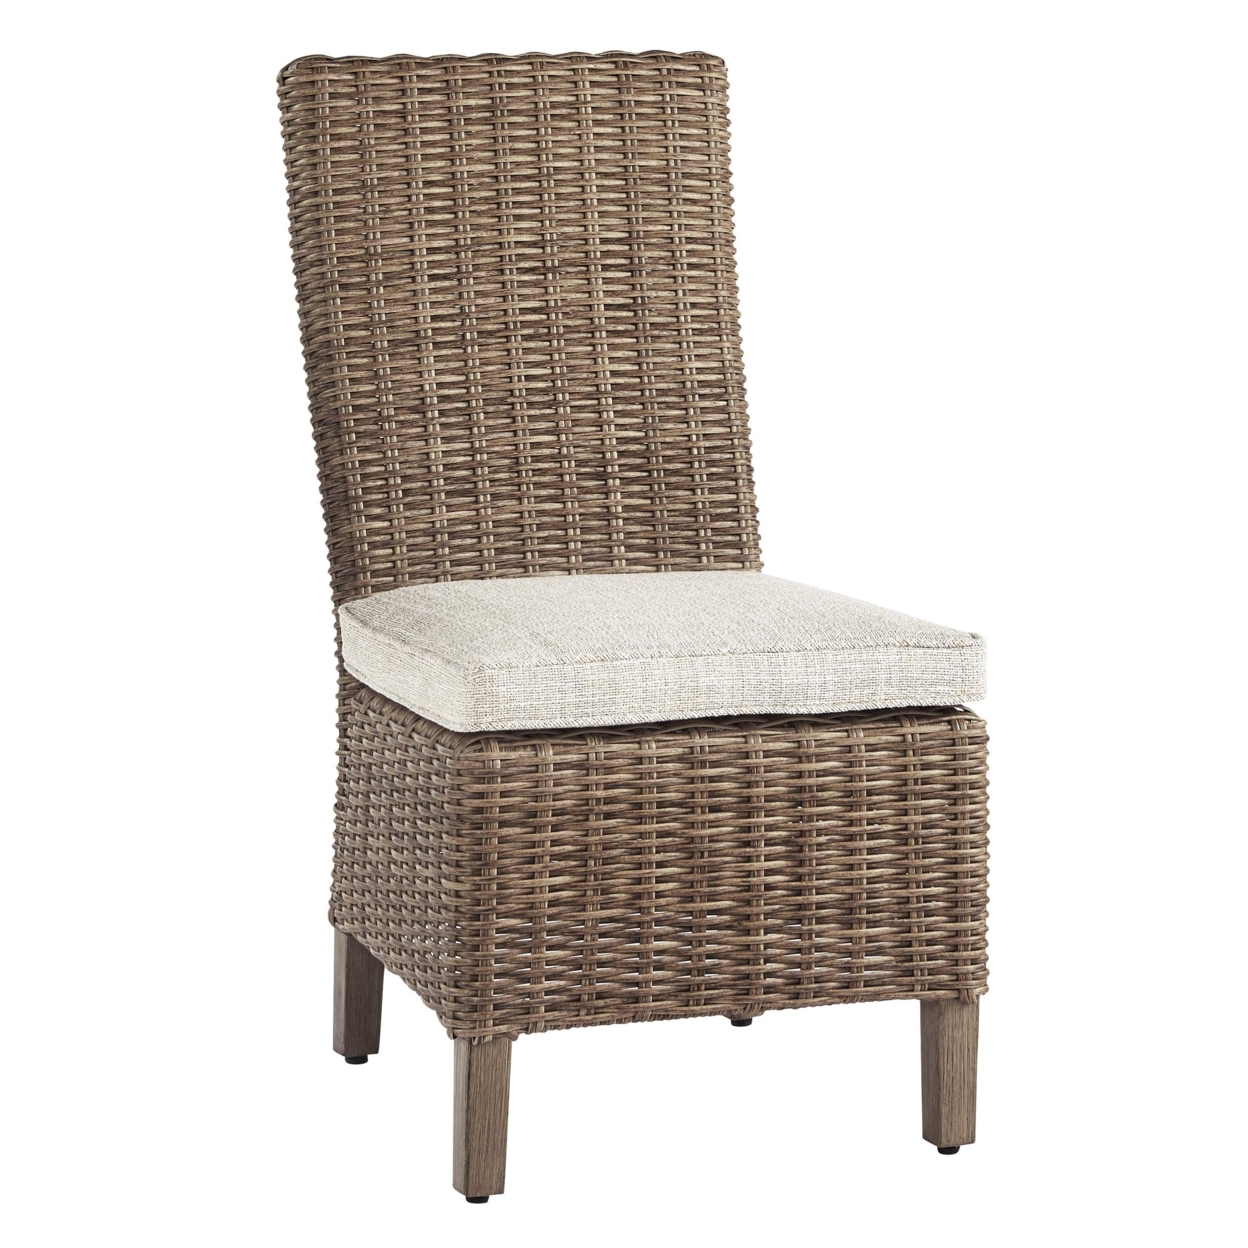 Aluminum Frame Side Chair With Handwoven Wicker, Set Of 2, Brown And Beige- Saltoro Sherpi